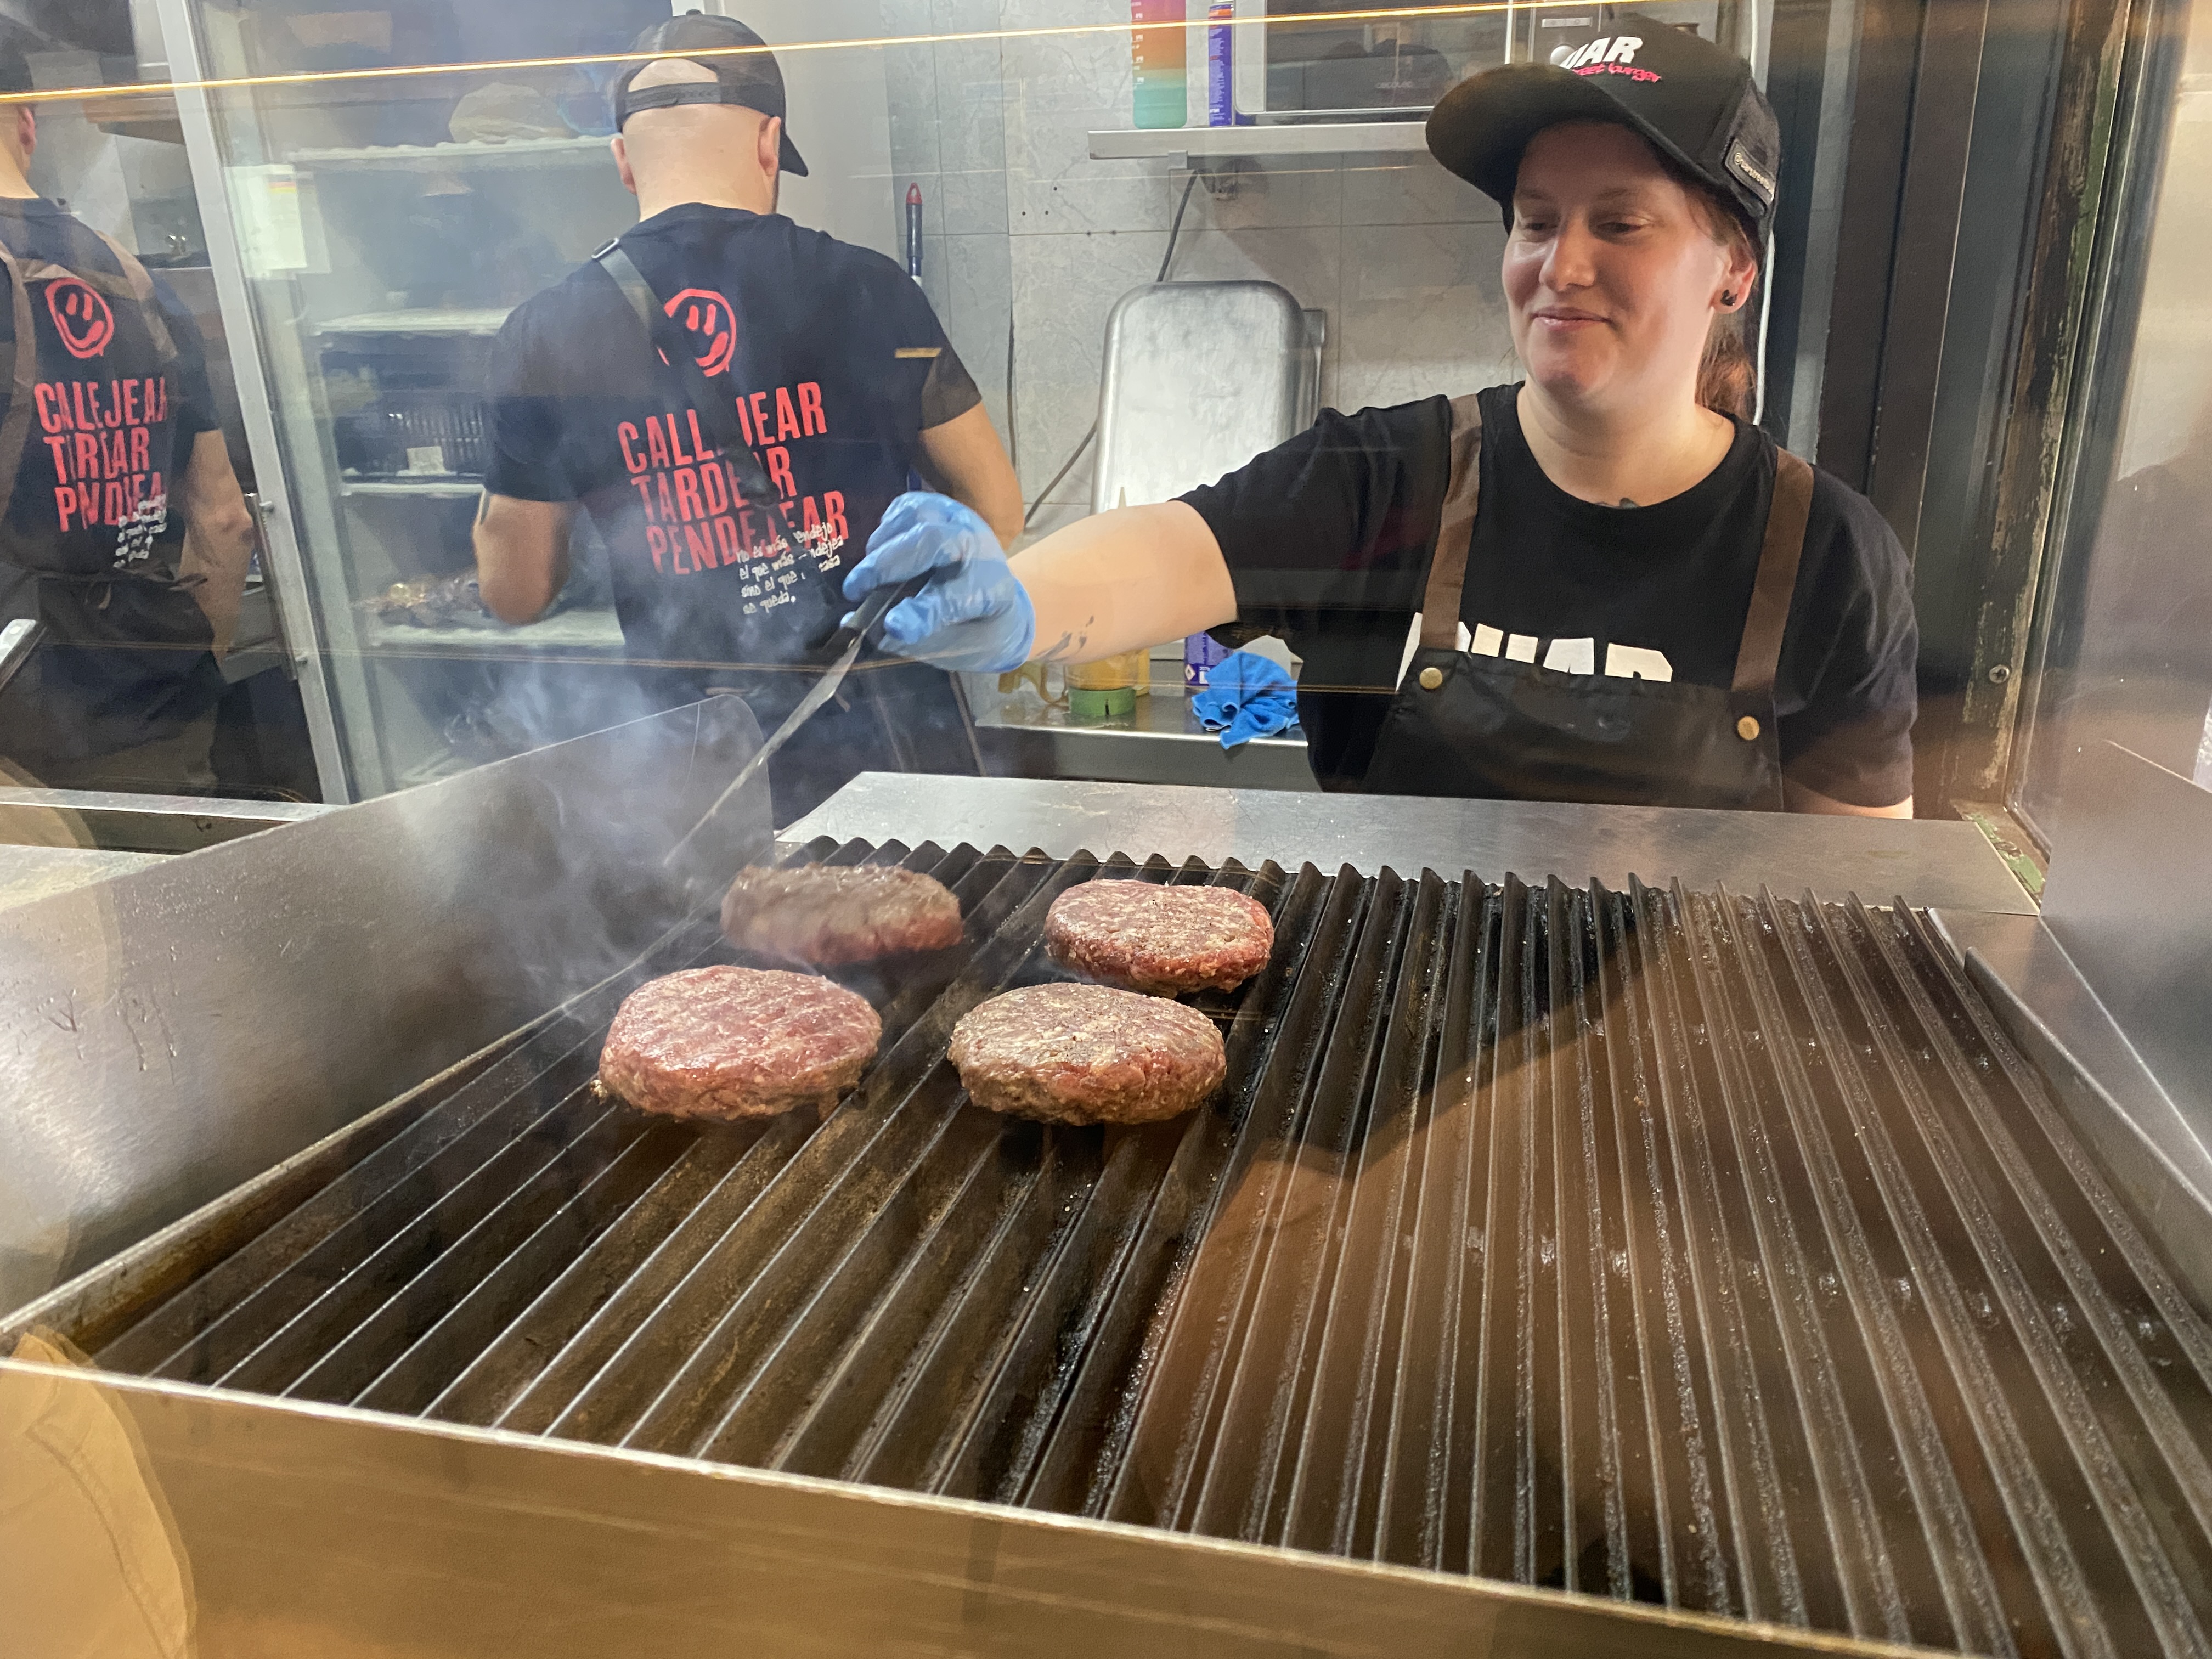 RUAR Street Burger lets costumers look inside their kitchen